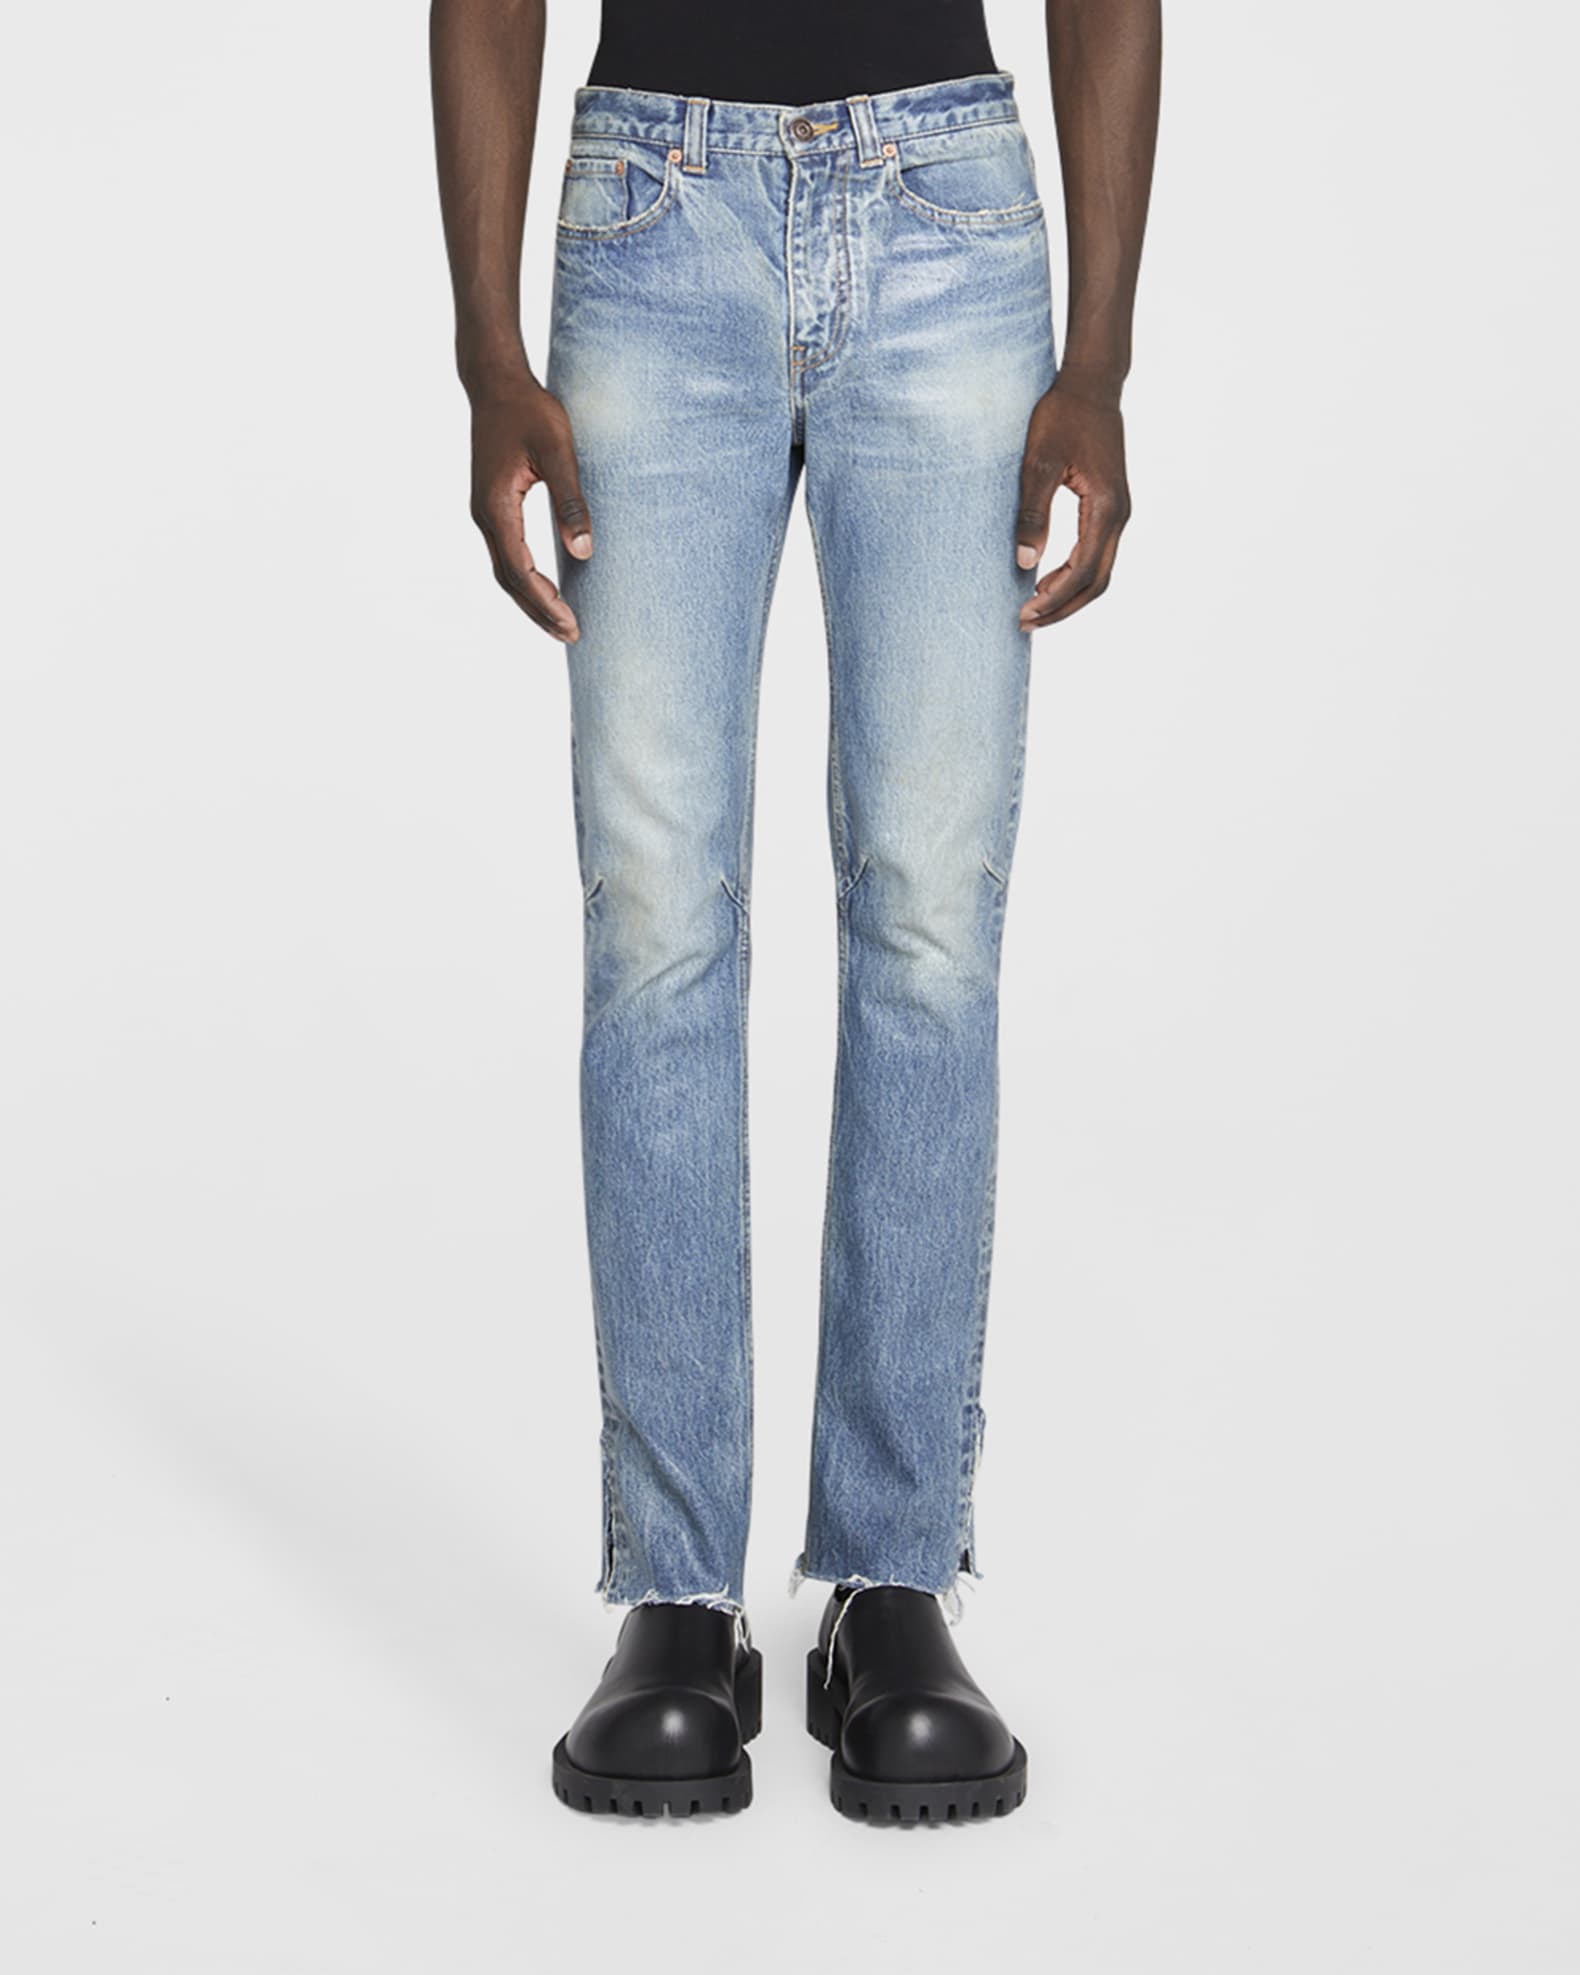 Og hold Brun Regnbue Balenciaga Men's Super Fitted Waxed Jeans | Neiman Marcus